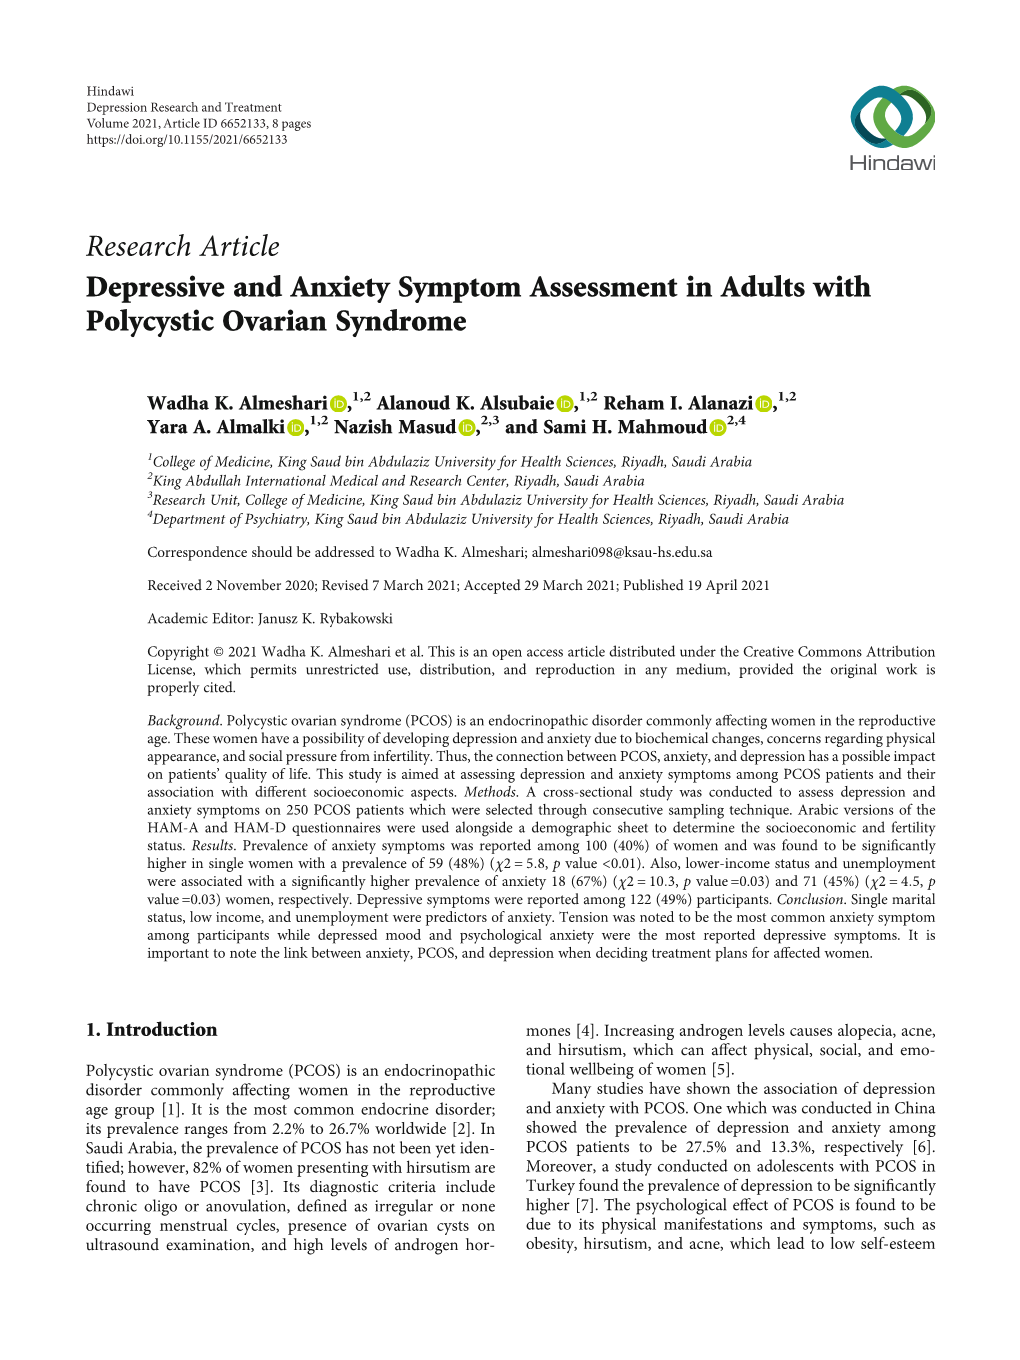 Depressive and Anxiety Symptom Assessment in Adults with Polycystic Ovarian Syndrome